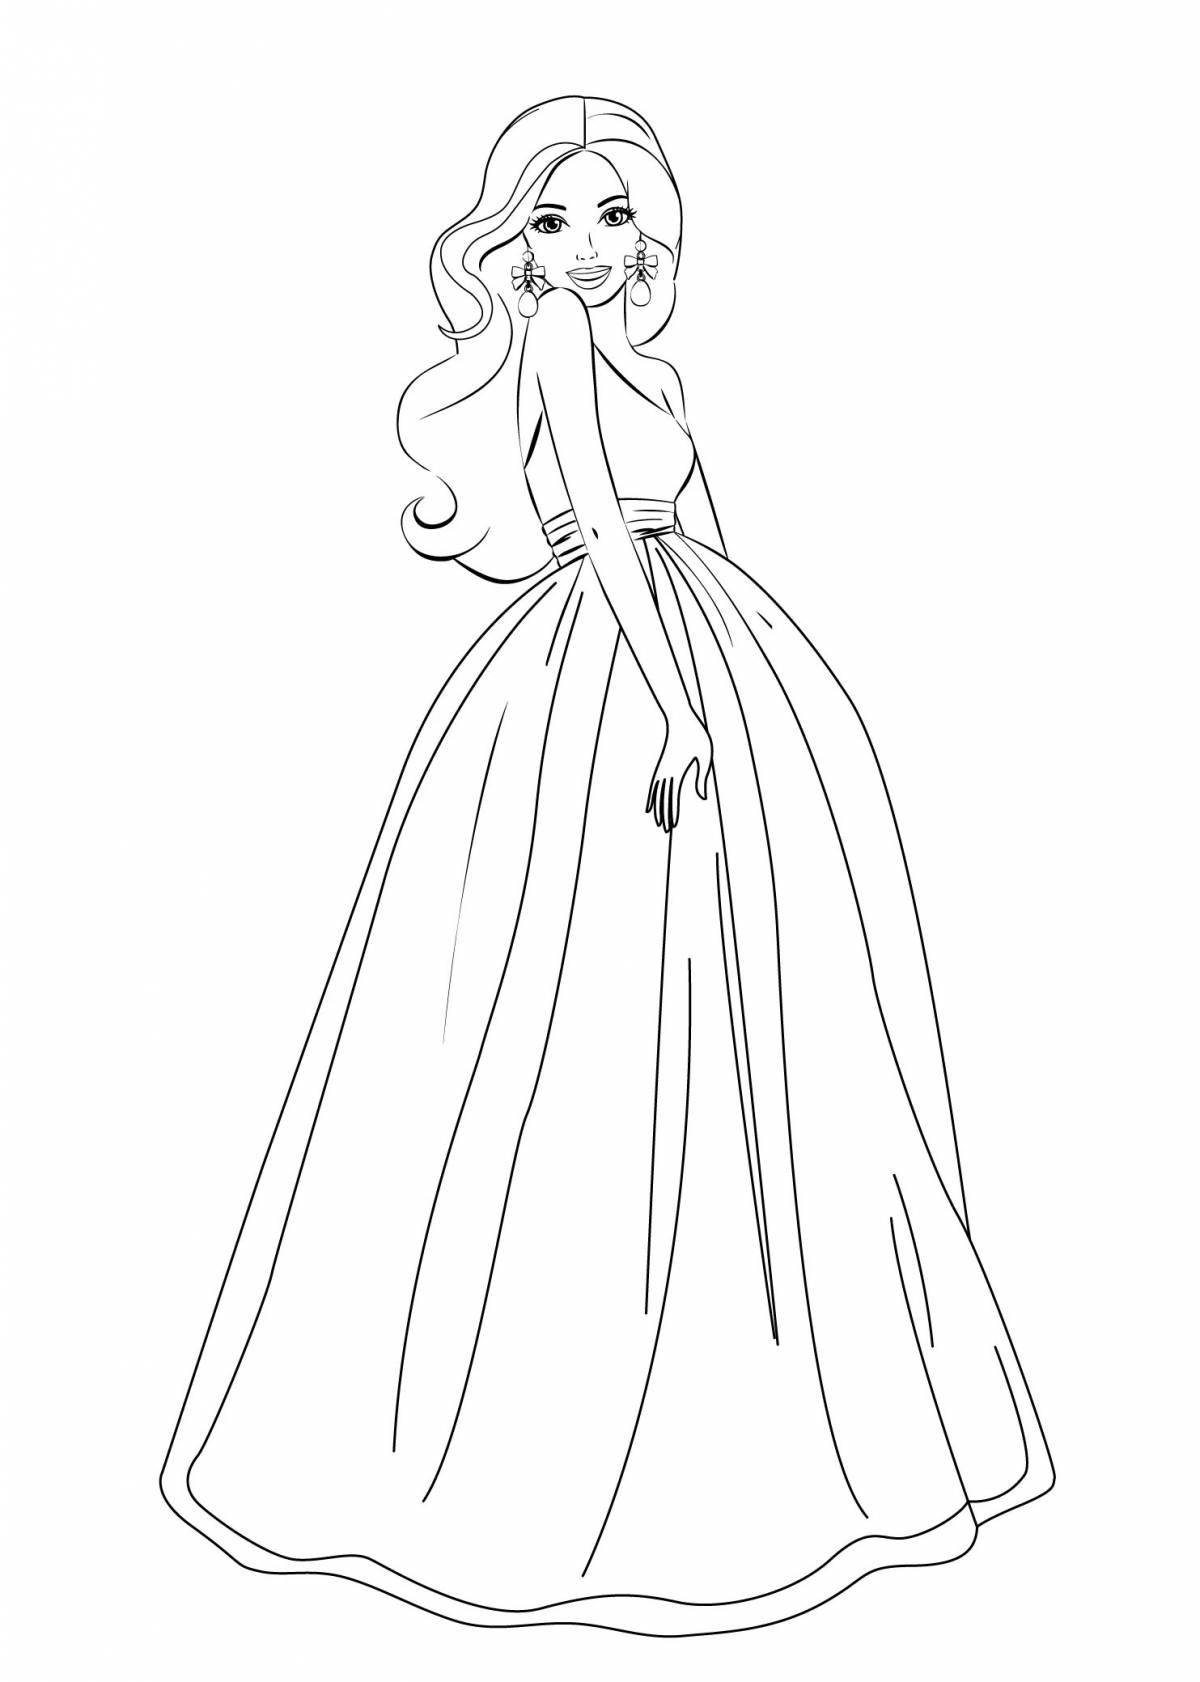 Adorable barbie princess coloring pages for girls